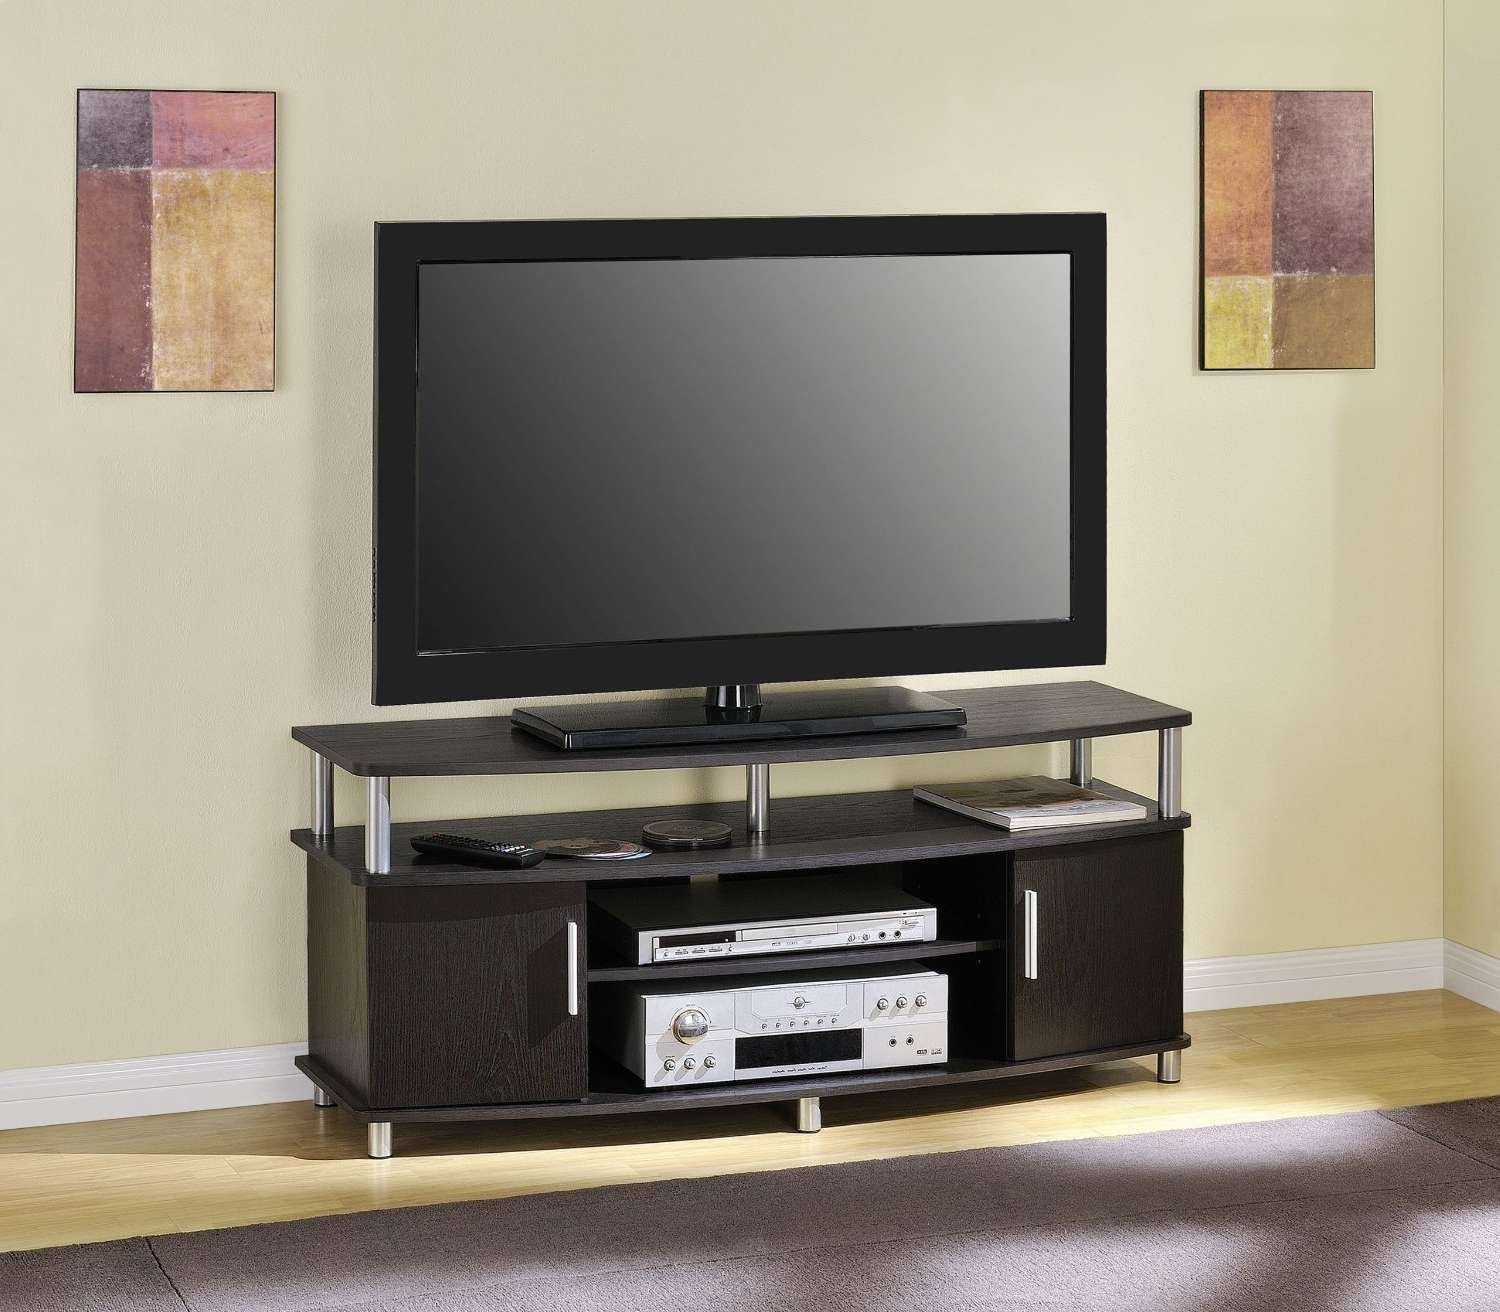 Tv Stands: 7 Best Selling Flat Screen Tv Stands 2017 In 24 Inch Led Tv Stands (View 1 of 15)